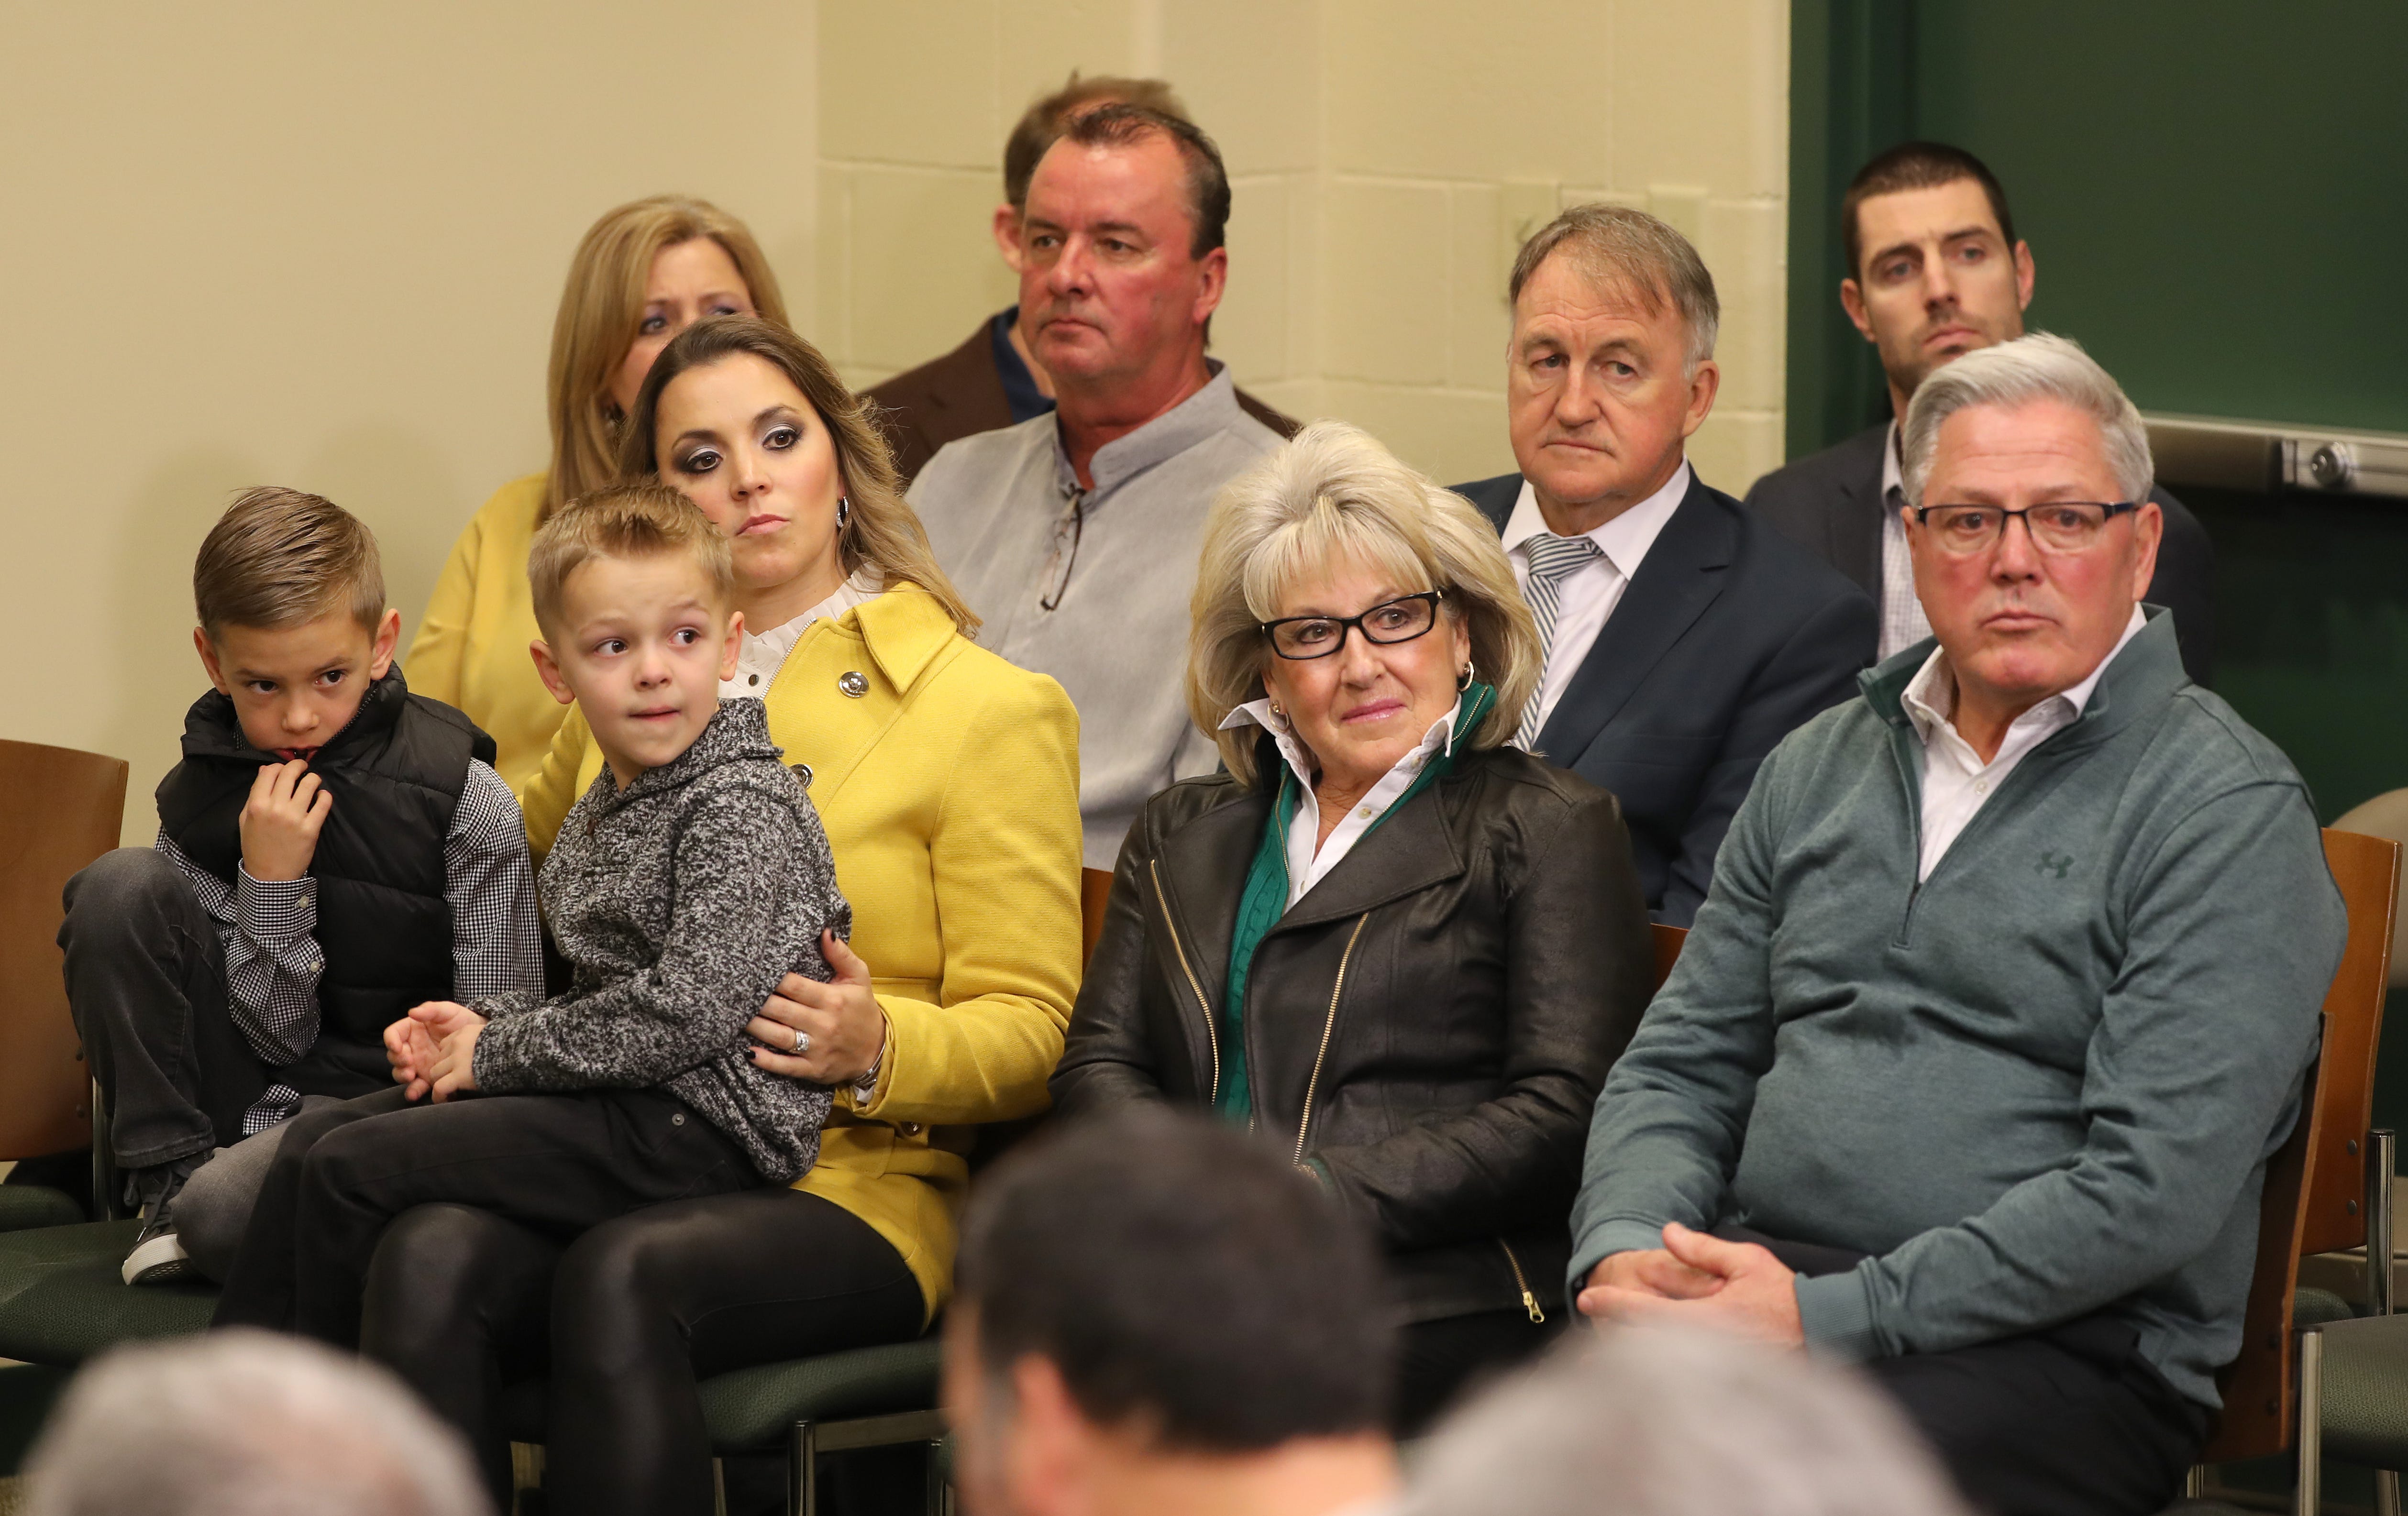 The family of new Green Bay Packers head coach Matt LaFleur looks on during media questioning as LaFleur is introduced during a press conference in the Lambeau Field media auditorium Wednesday, January 9, 2019 in Green Bay, Wis.